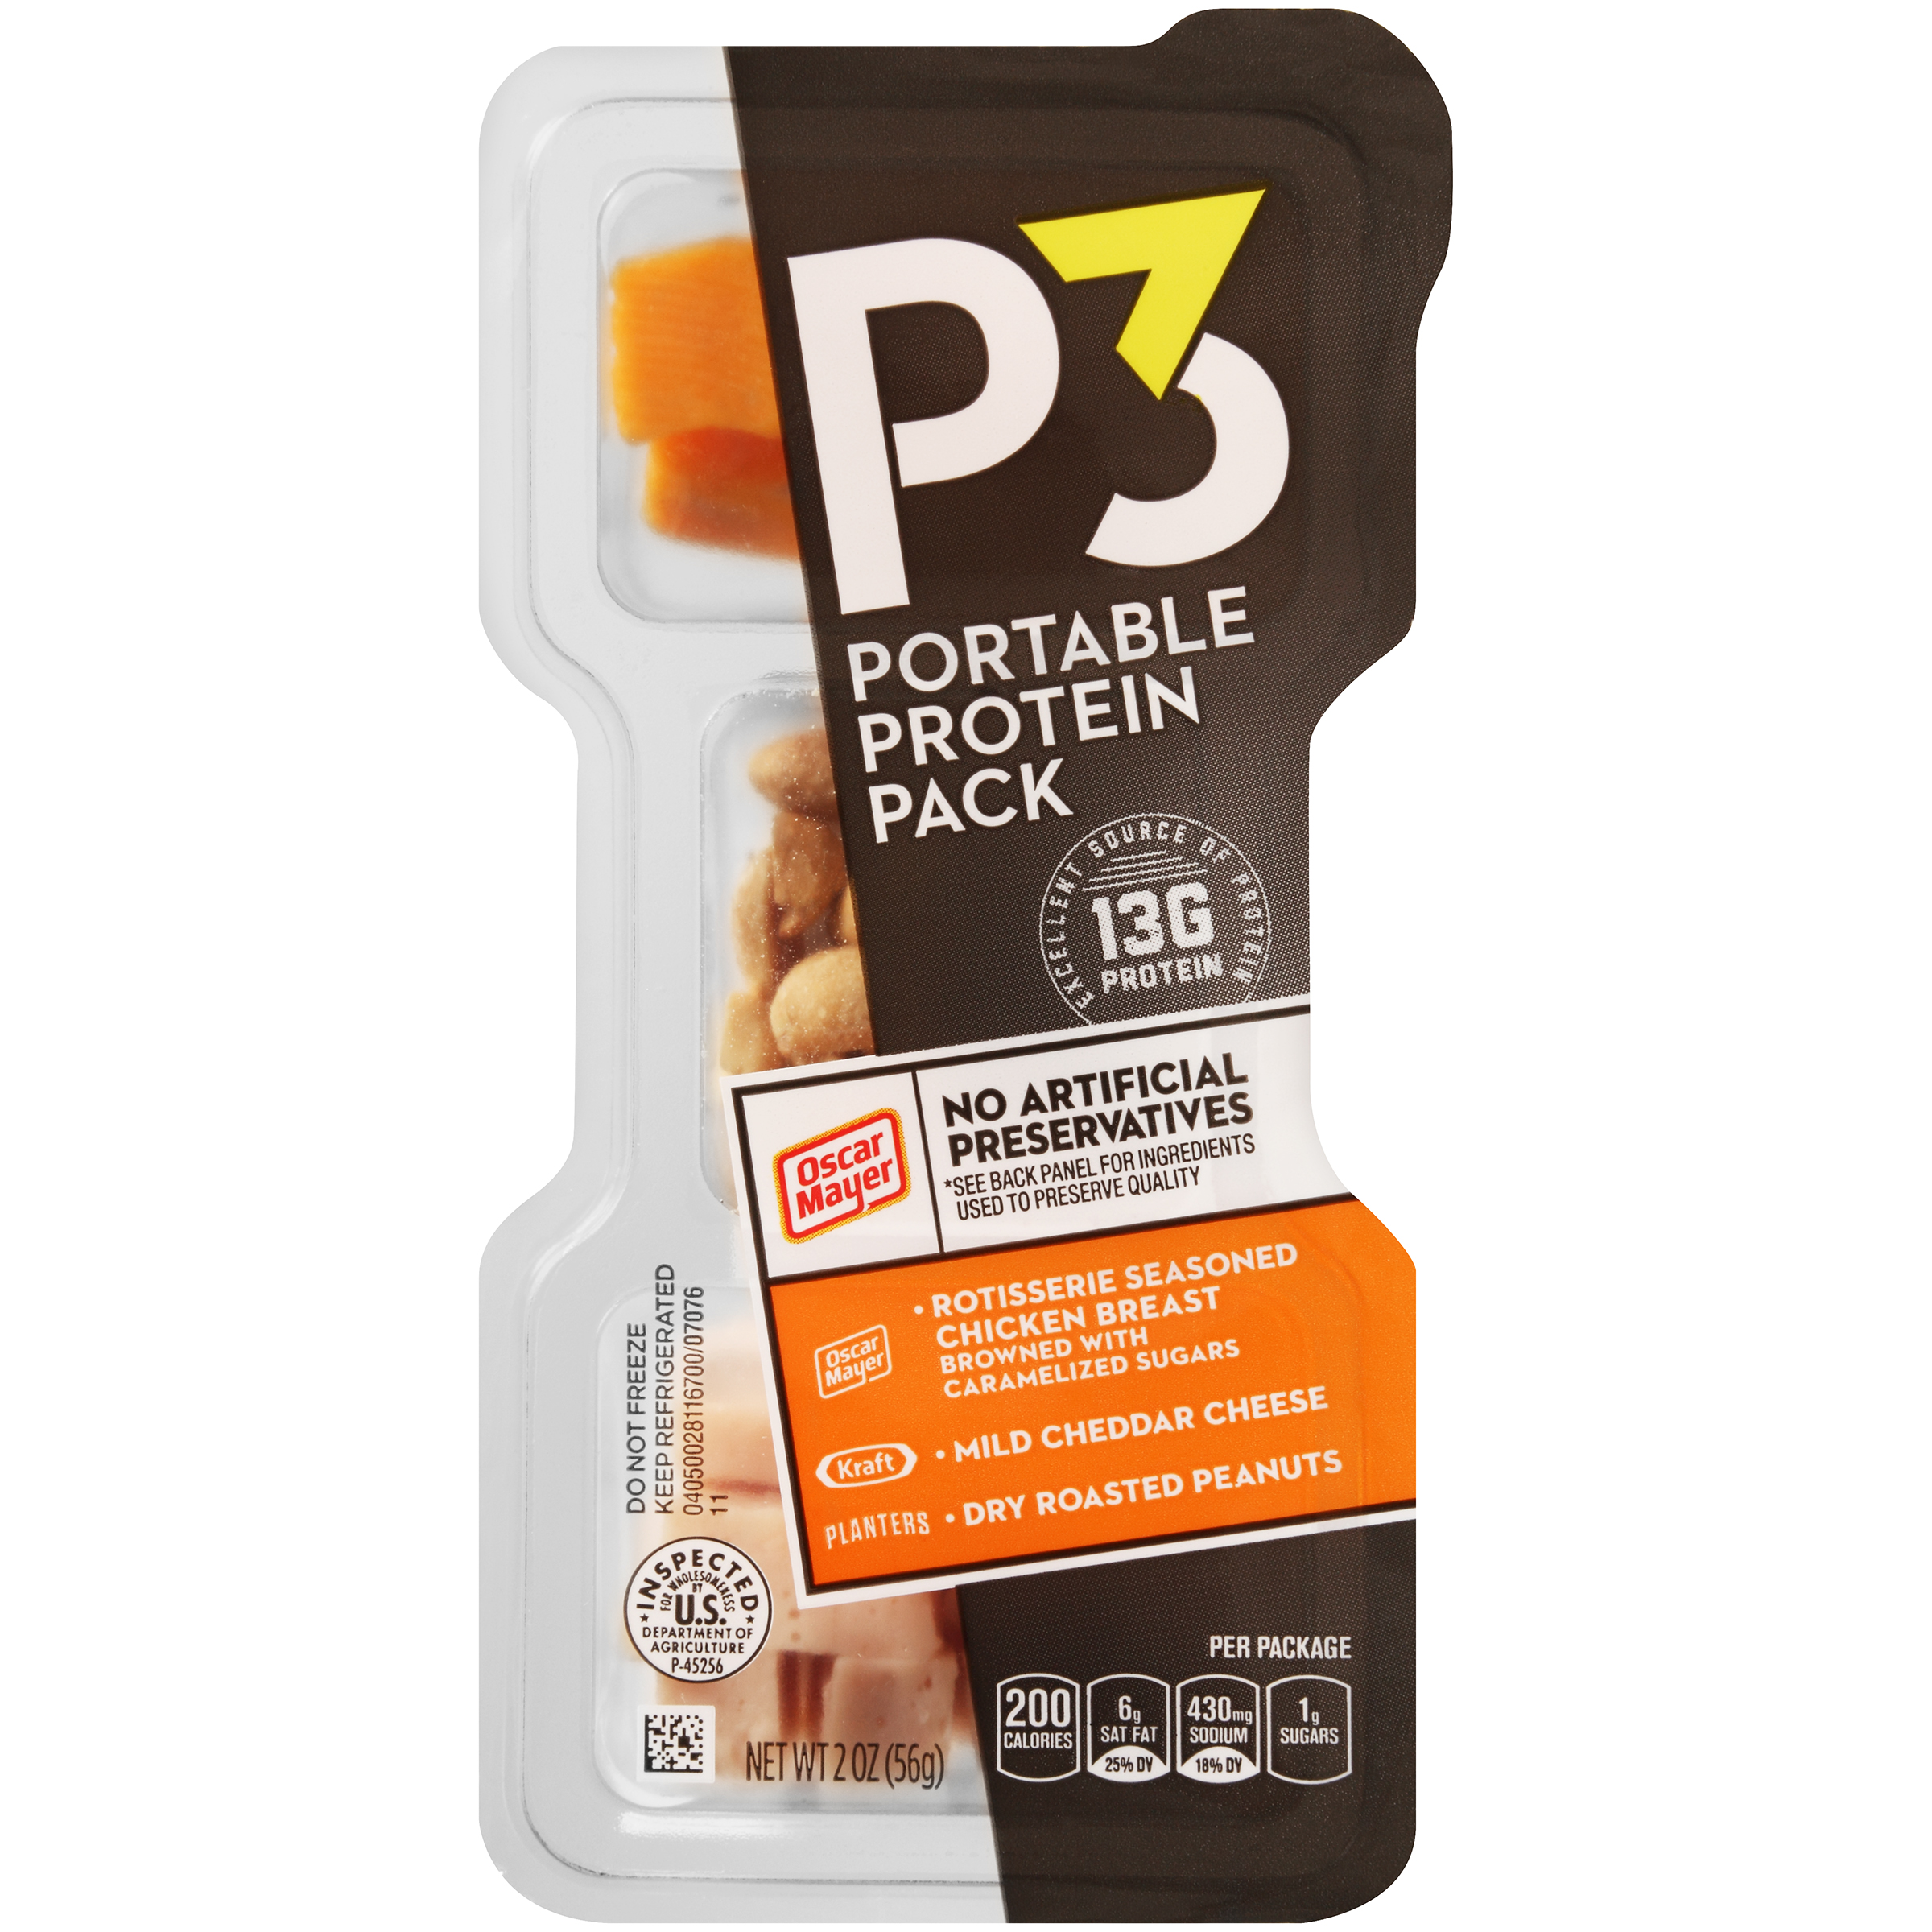 UPC 044700070765 product image for Chicken Breast/Cheddar/Peanuts Portable Protein Pack | upcitemdb.com